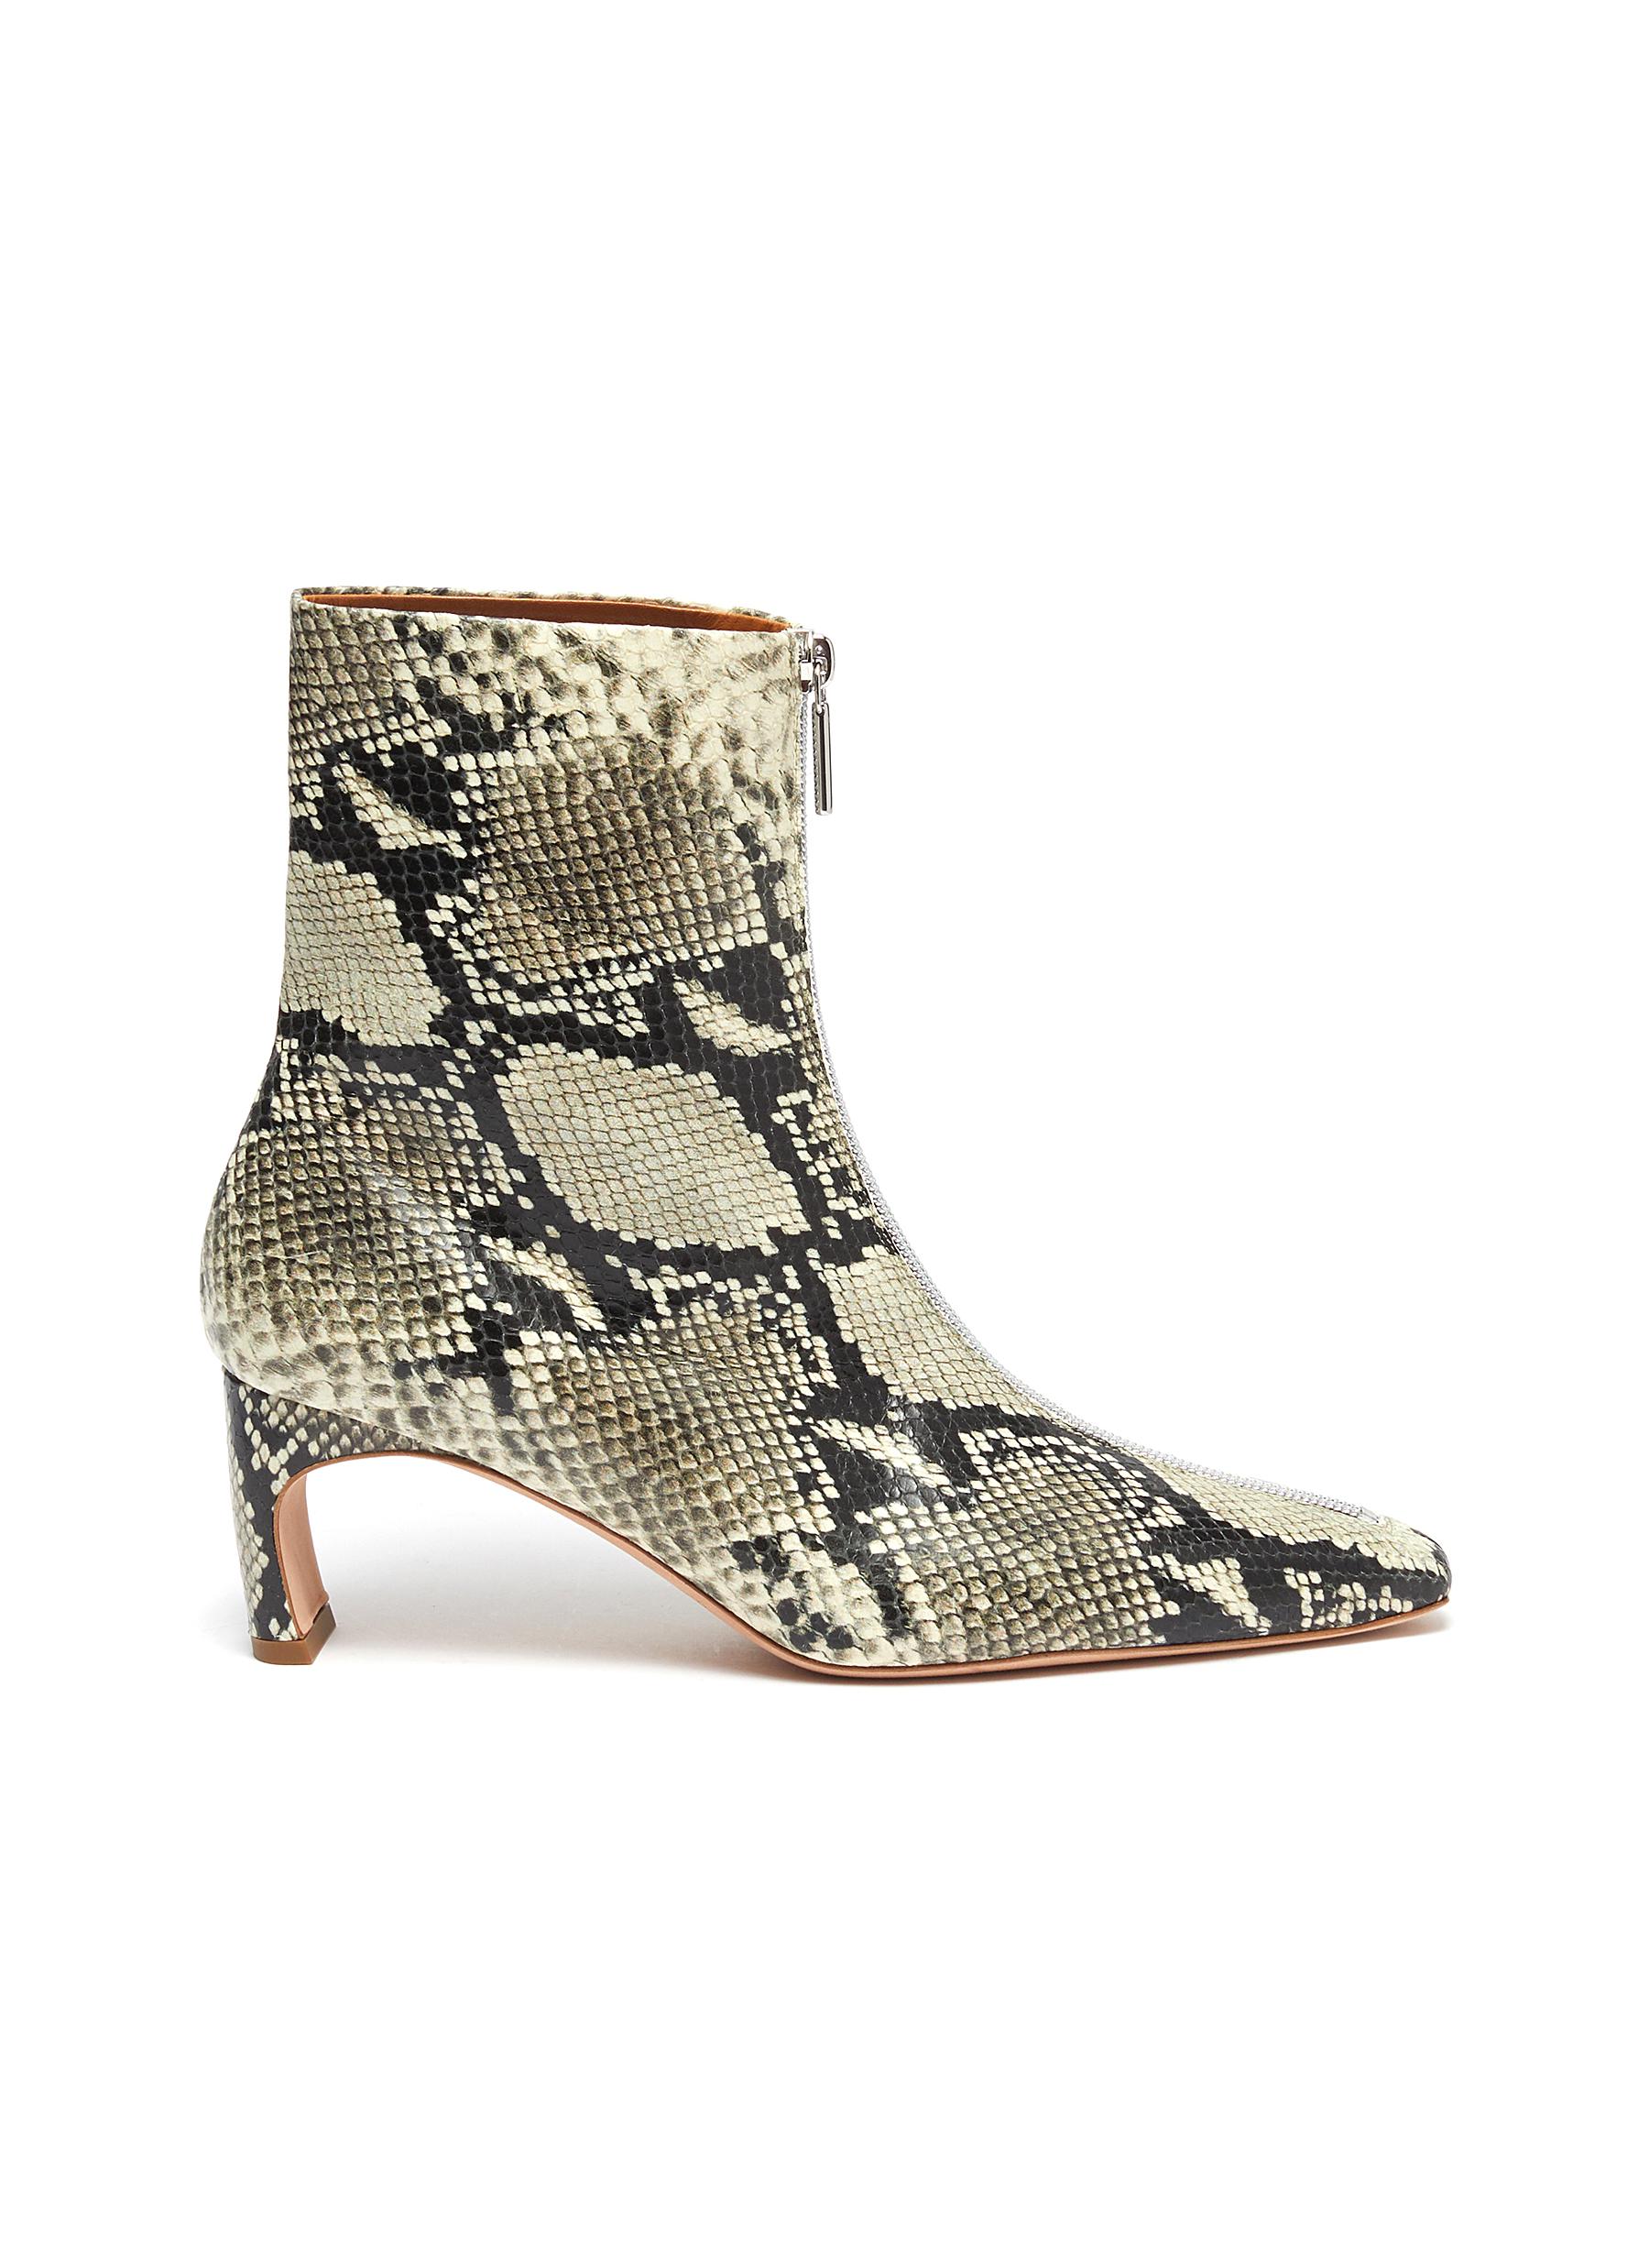 Rosetta Getty Boots Zip front snake embossed leather ankle boots